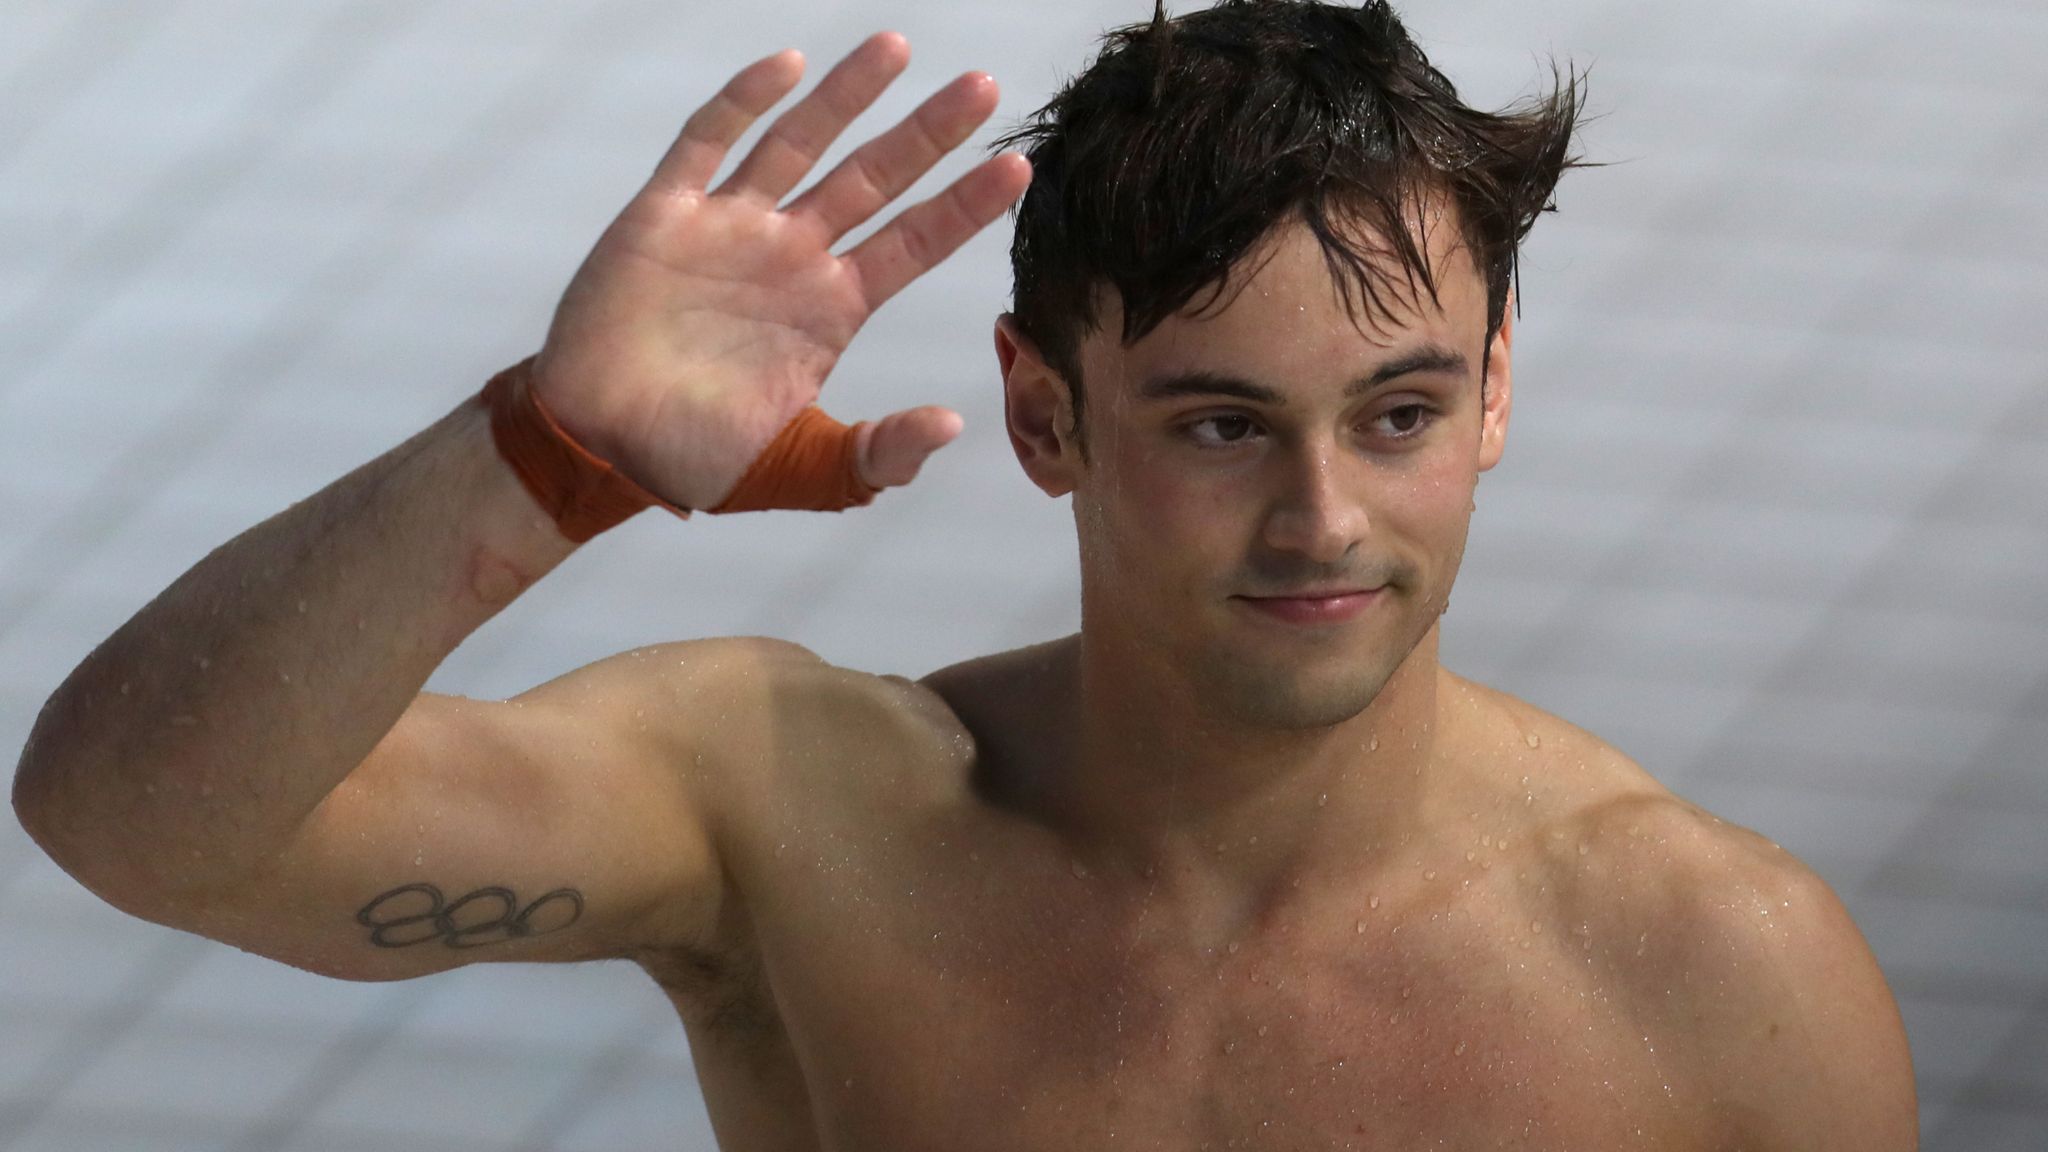 Tom Daley: Team GB diver discusses Tokyo Olympics ambitions and how fatherhood has changed him